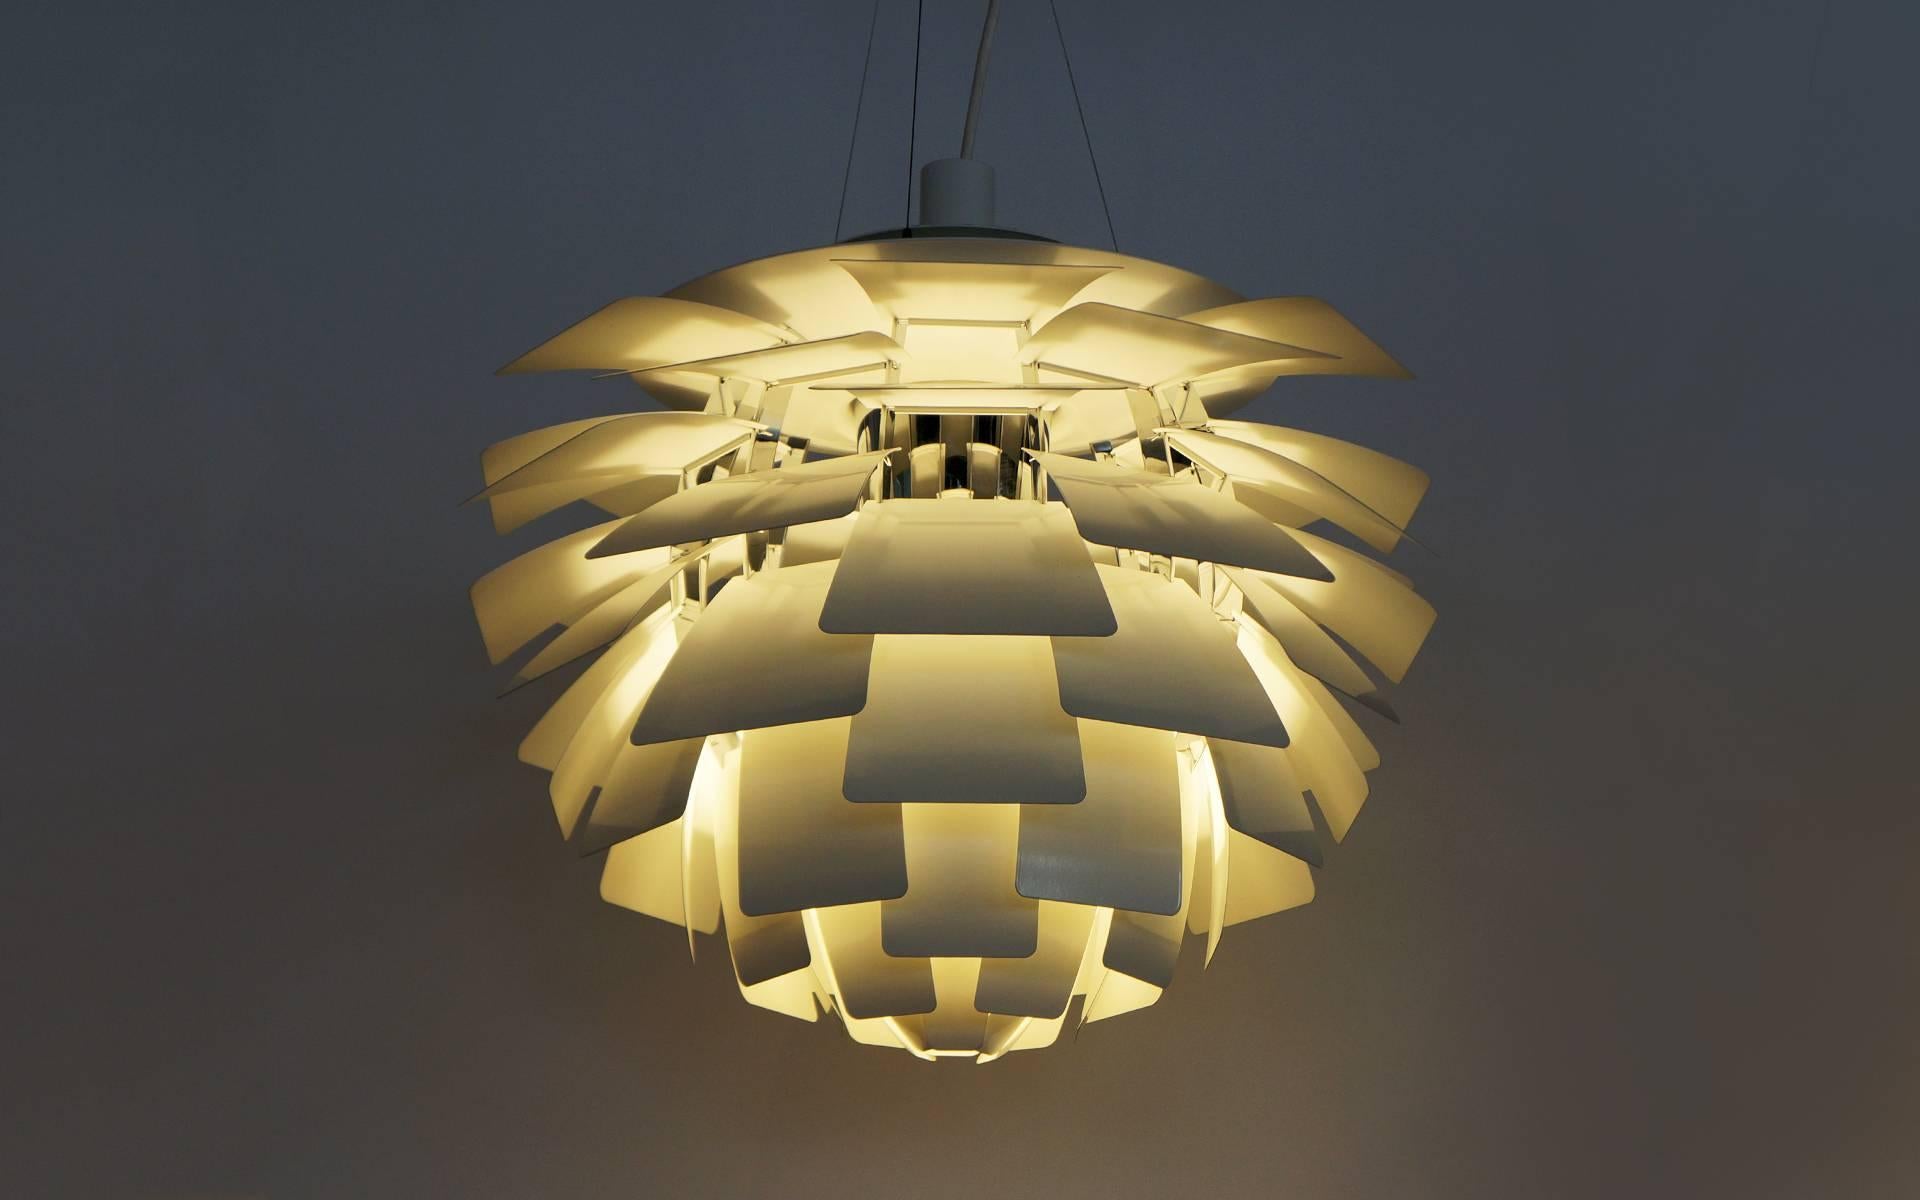 This is an authentic recent production Artichoke chandelier / light fixture designed by Poul Henningsen and made by Louis Poulsen, Denmark. The best price to buy this new is $15000. Our price is $9500 and it is just like new. 23.6 inch diameter.